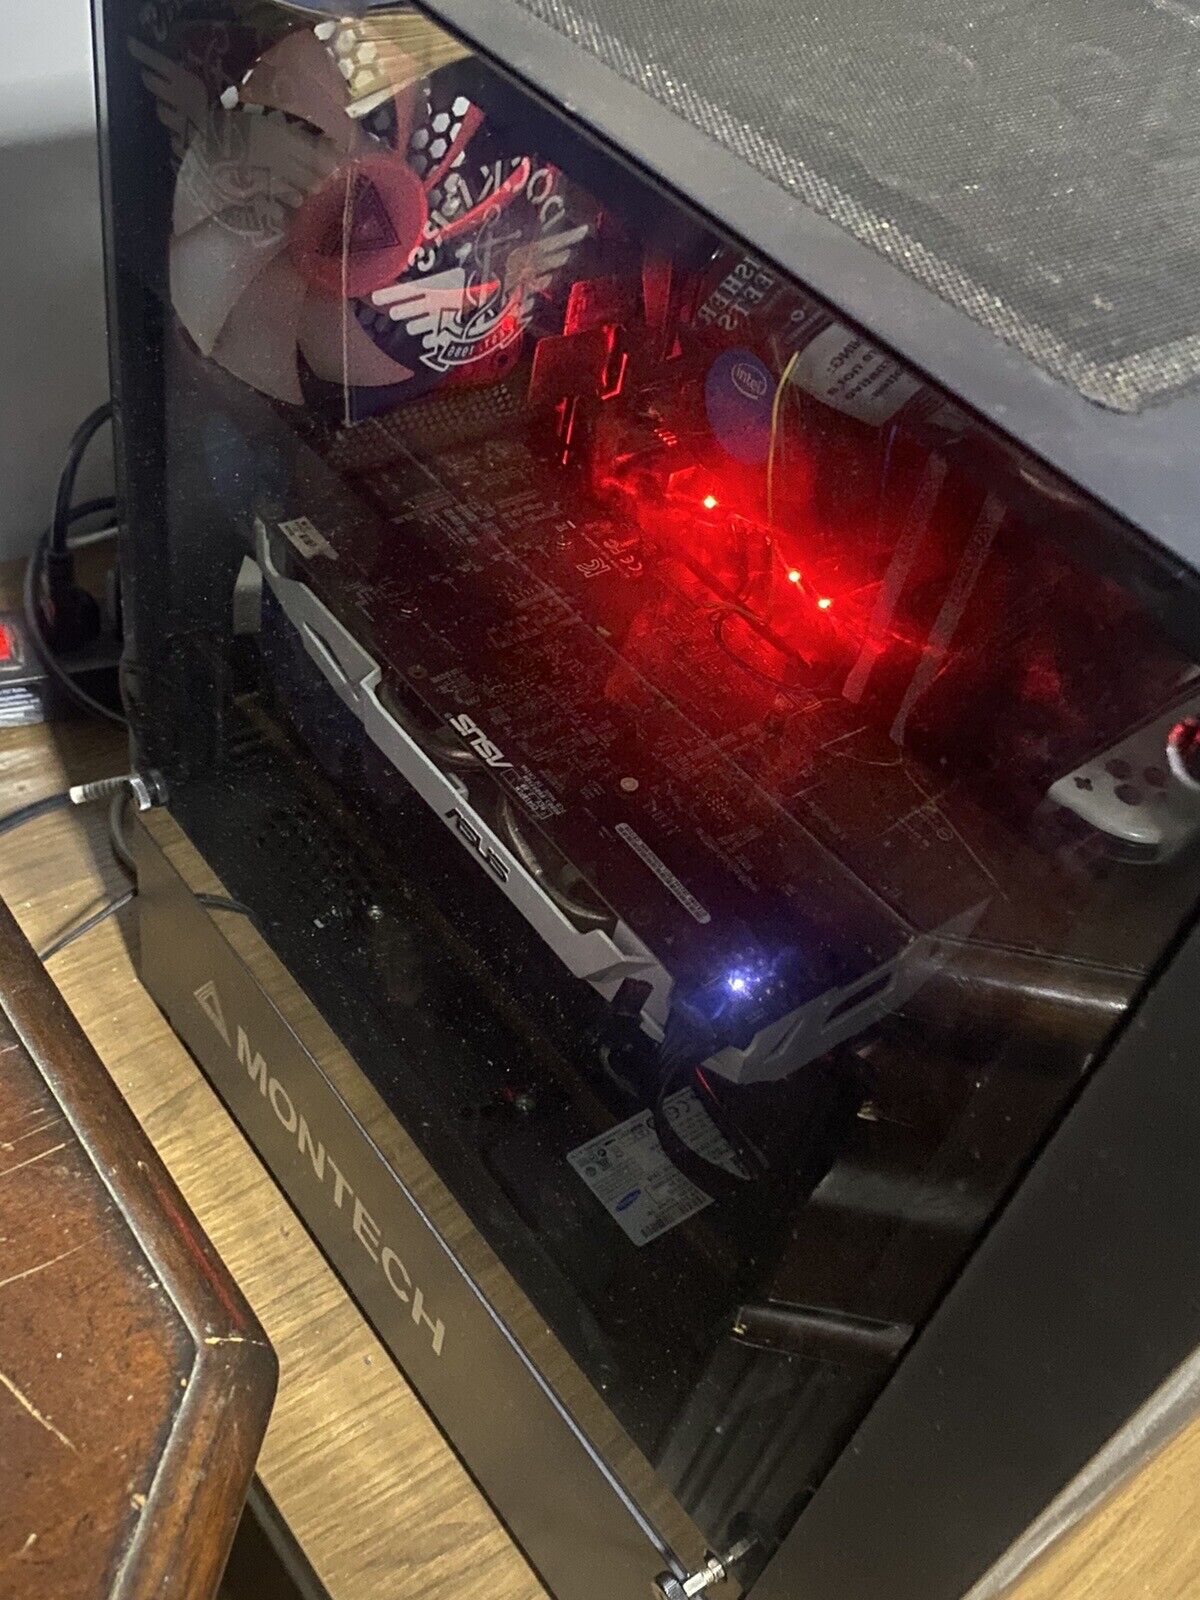 It’s A Really Good Pc Runs Everything Smooth Works Perfect